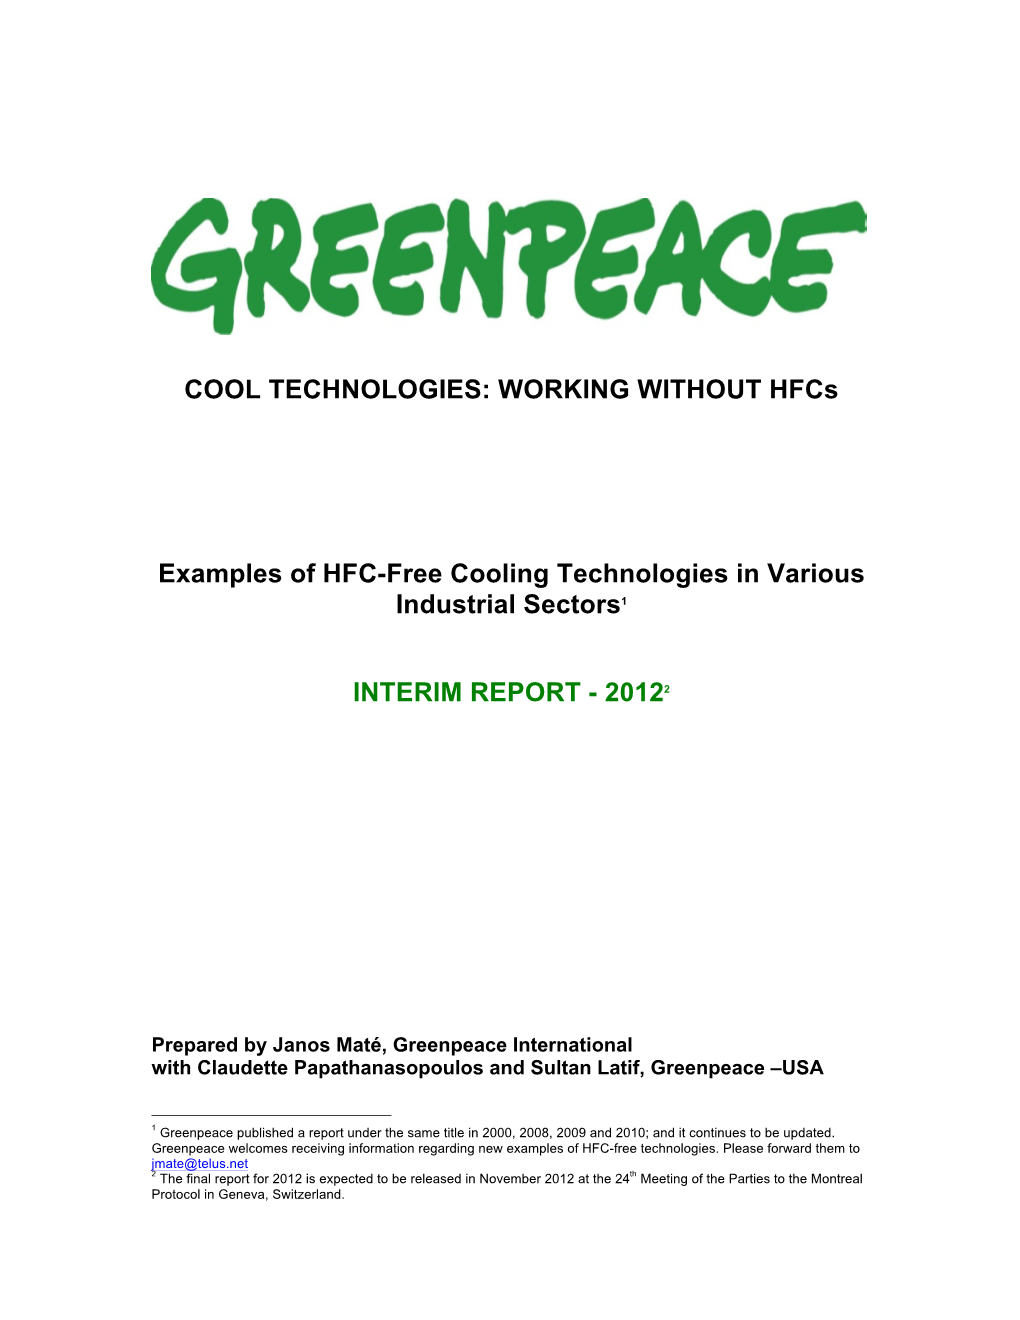 WORKING WITHOUT Hfcs Examples of HFC-Free Cooling Technologies